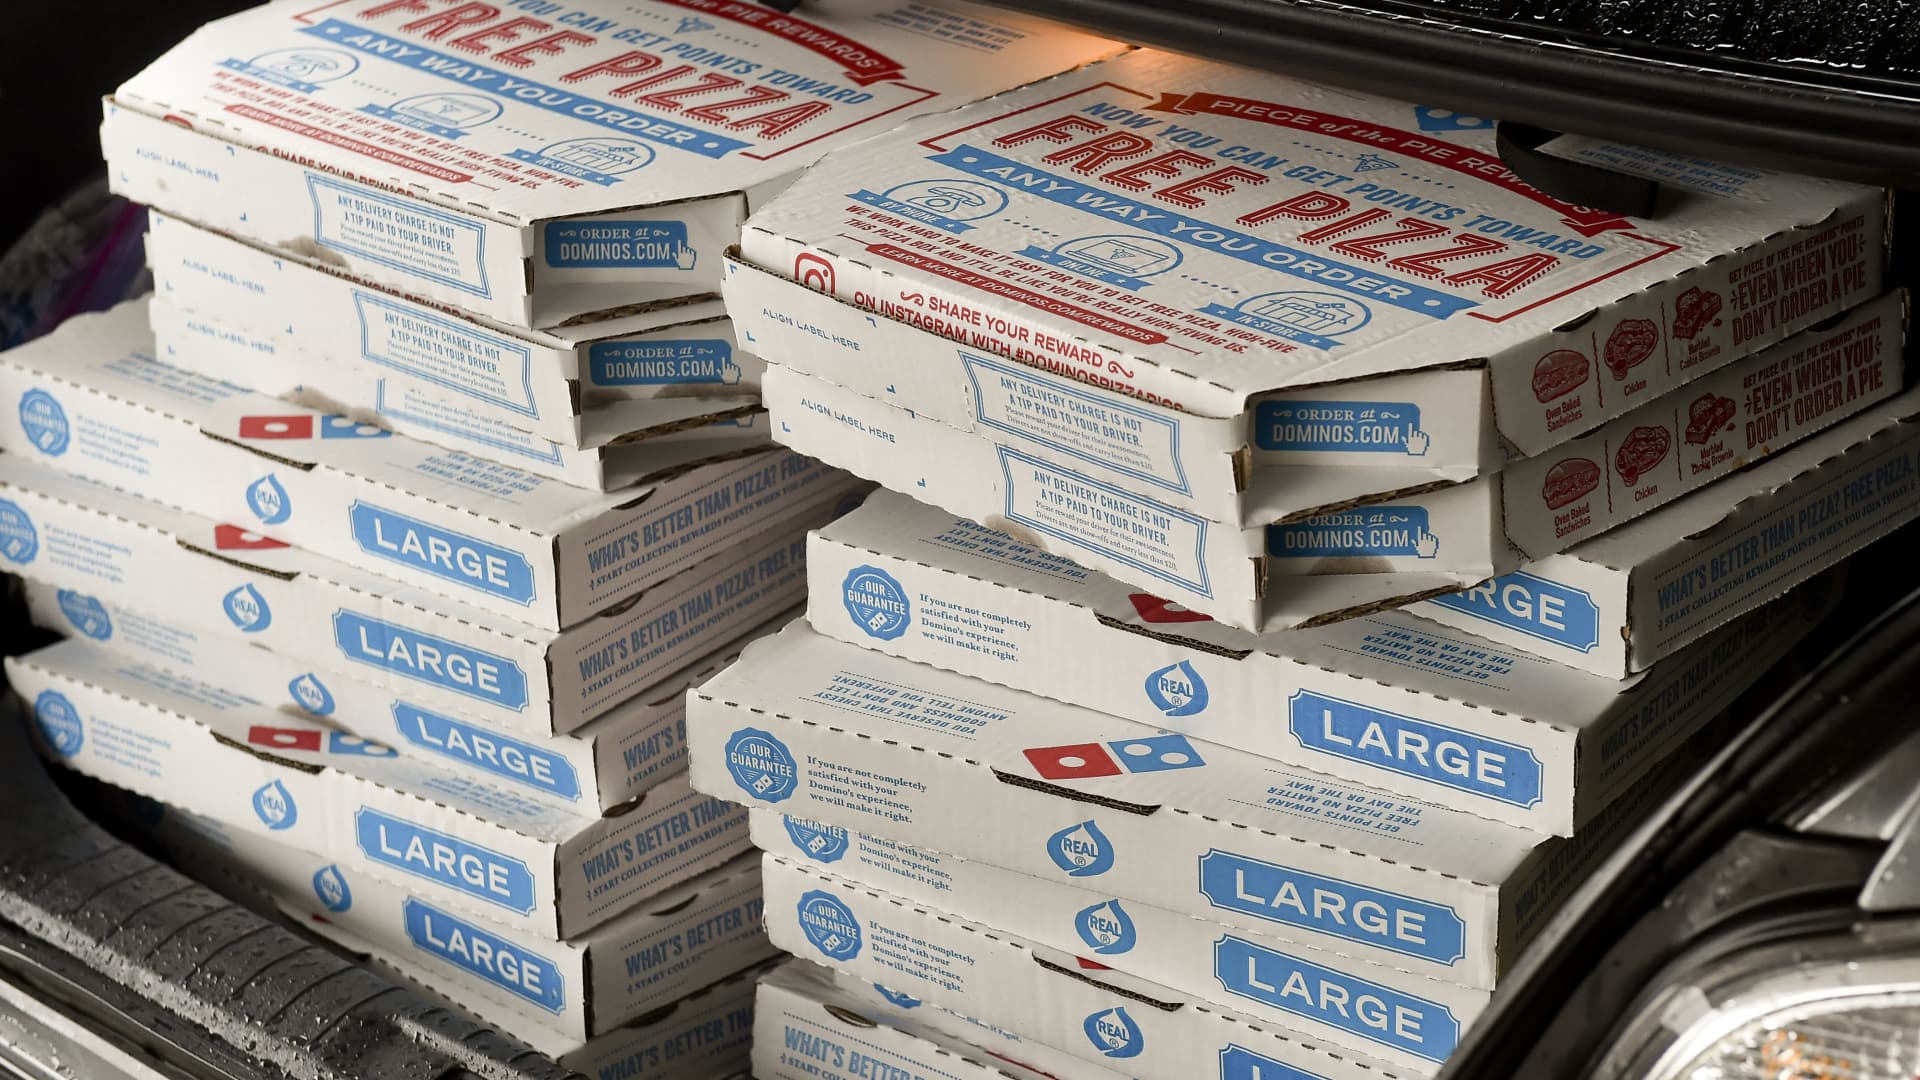 Domino's Pizza says arrivederci, flees Italy after failing to win over local customers